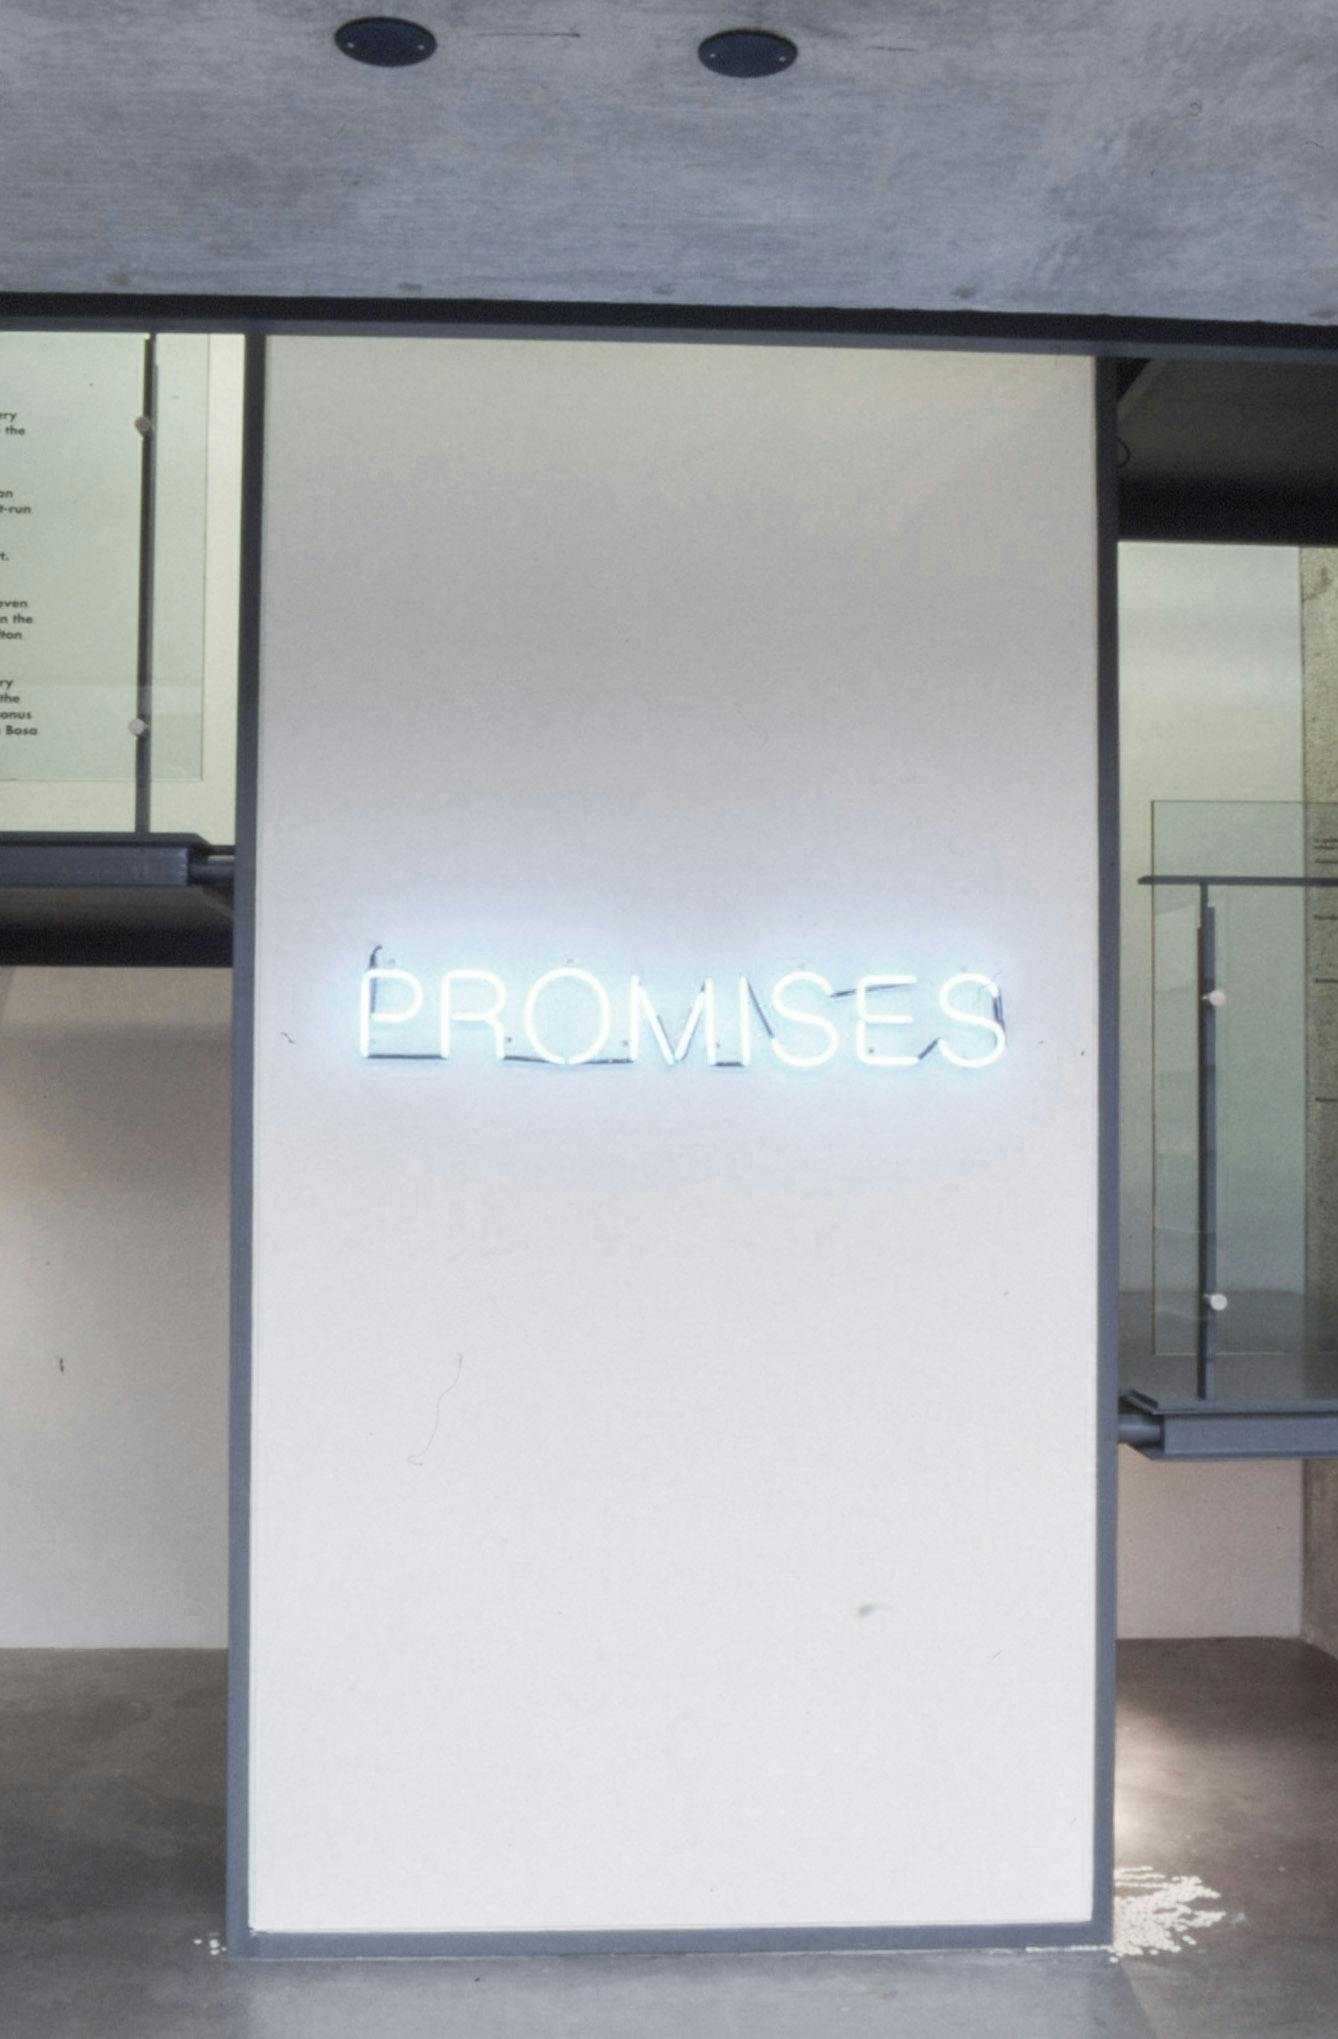 A blue-white coloured neon sign is installed on the wall in a gallery space. The sign shows the exhibition title, PROMISES. 